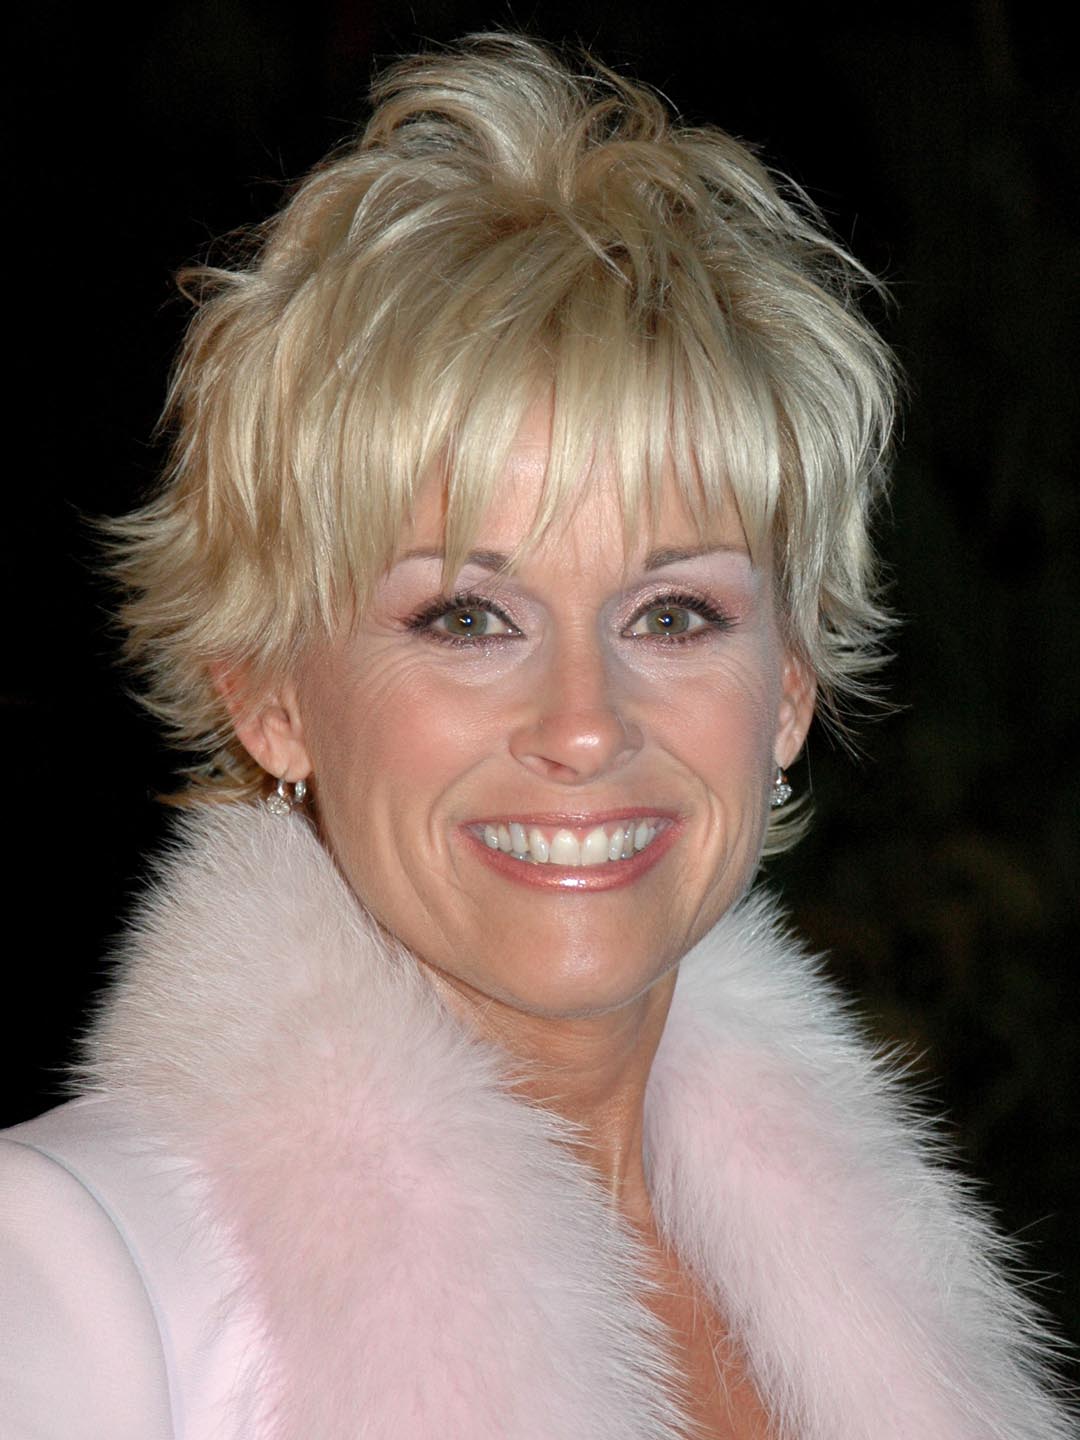 Pictures Gallery of lorrie morgan short haircuts.